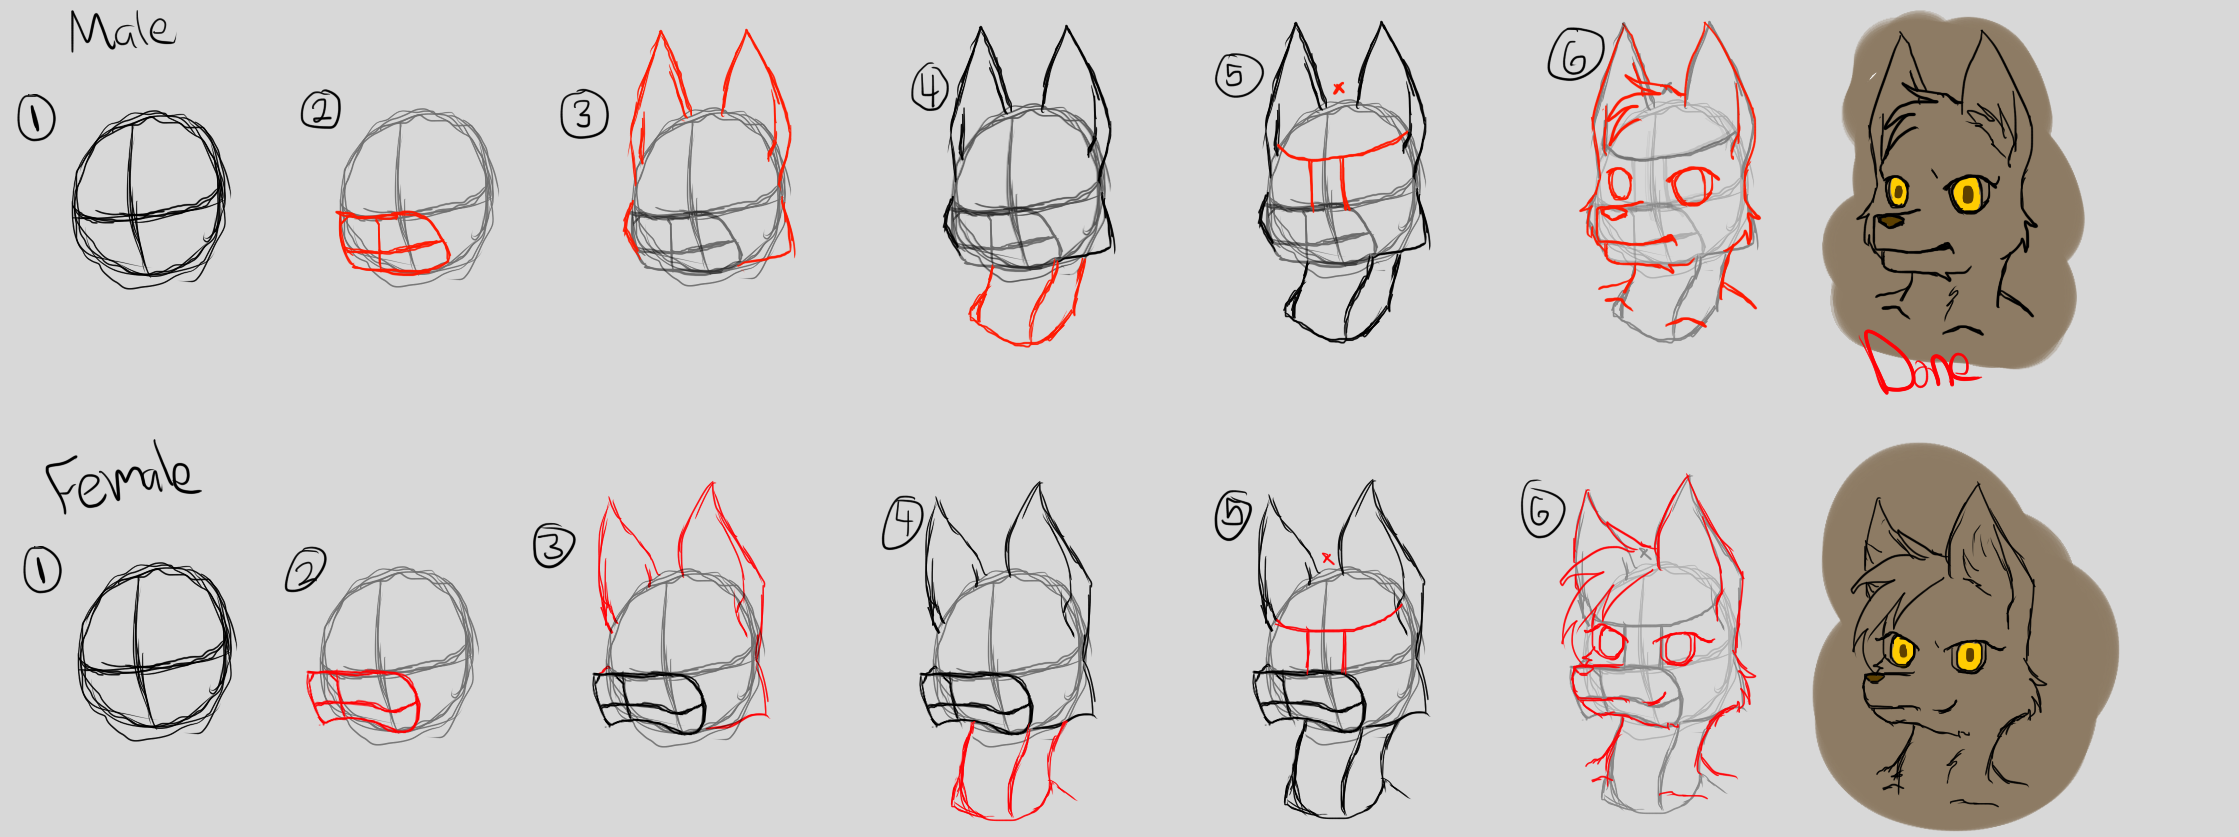 Image Of How To Draw Anthro Head 6 7 Step By Wub Bouncer On Deviantart.